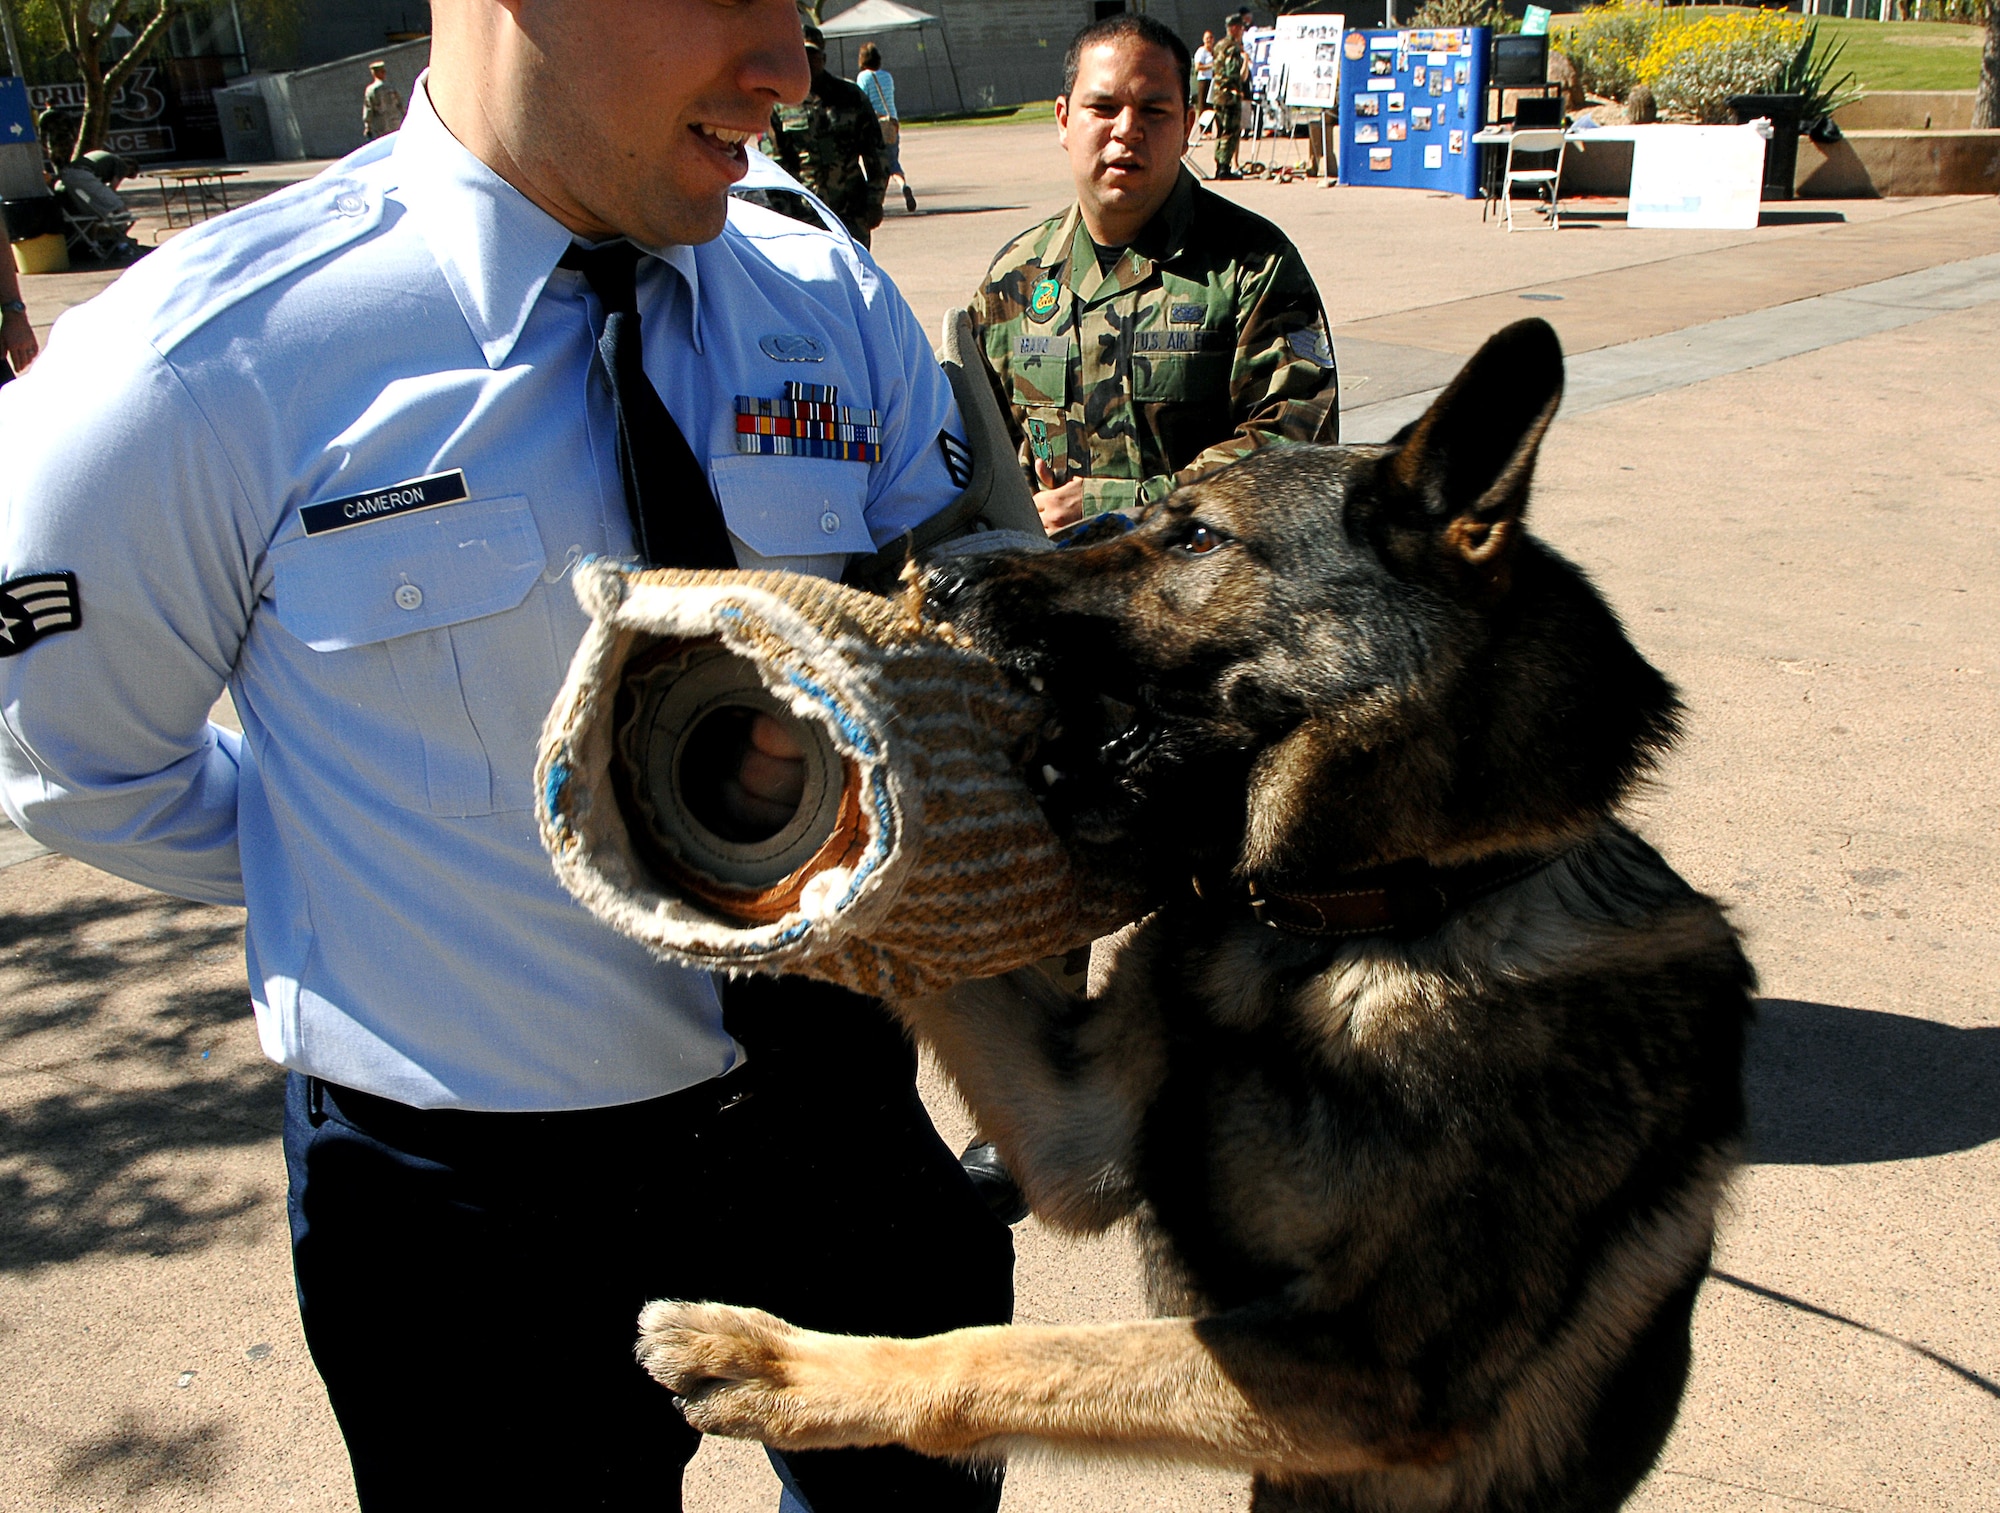 Senior Airman Brad Cameron catches a security forces working dog March 20 during an Air Force Week event at the Arizona Science Center in downtown Phoenix. The dogs were on hand to show visitors the role of dog handlers in the Air Force. (U.S. Air Force photo/Staff Sgt. Brian Ferguson)